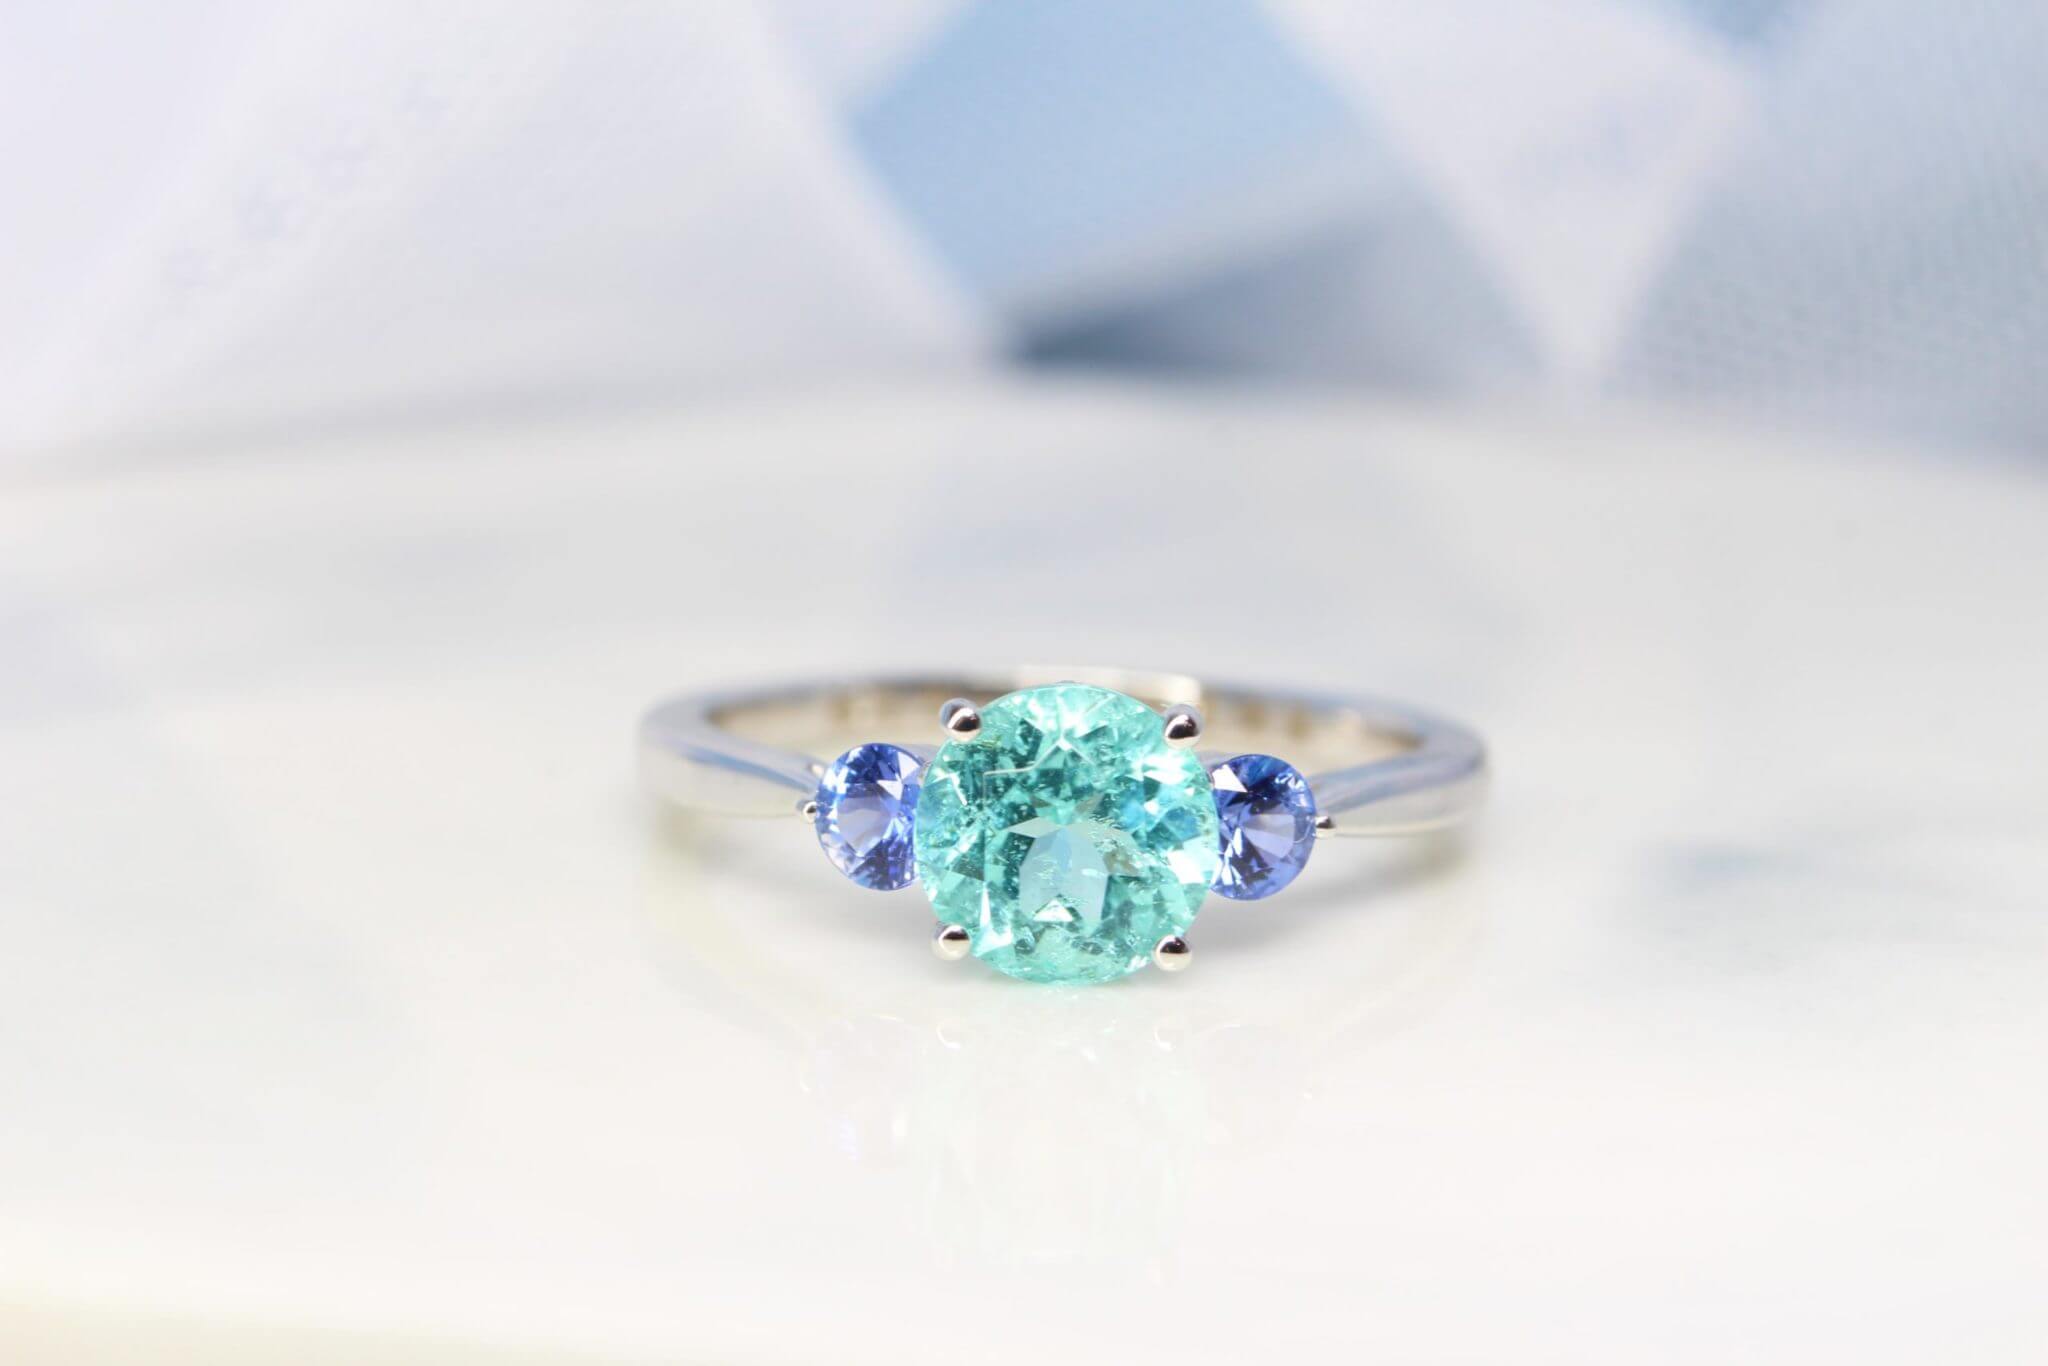 Engagement Ring with Paraiba Tourmaline customised with round blue tanzanite gemstone in 750 white gold band, unique customised engagement ring without diamond but customised with coloured gemstone for one of a kind design Local Singapore Jeweller in customised engagement ring with paraiba tourmaline gemstone.